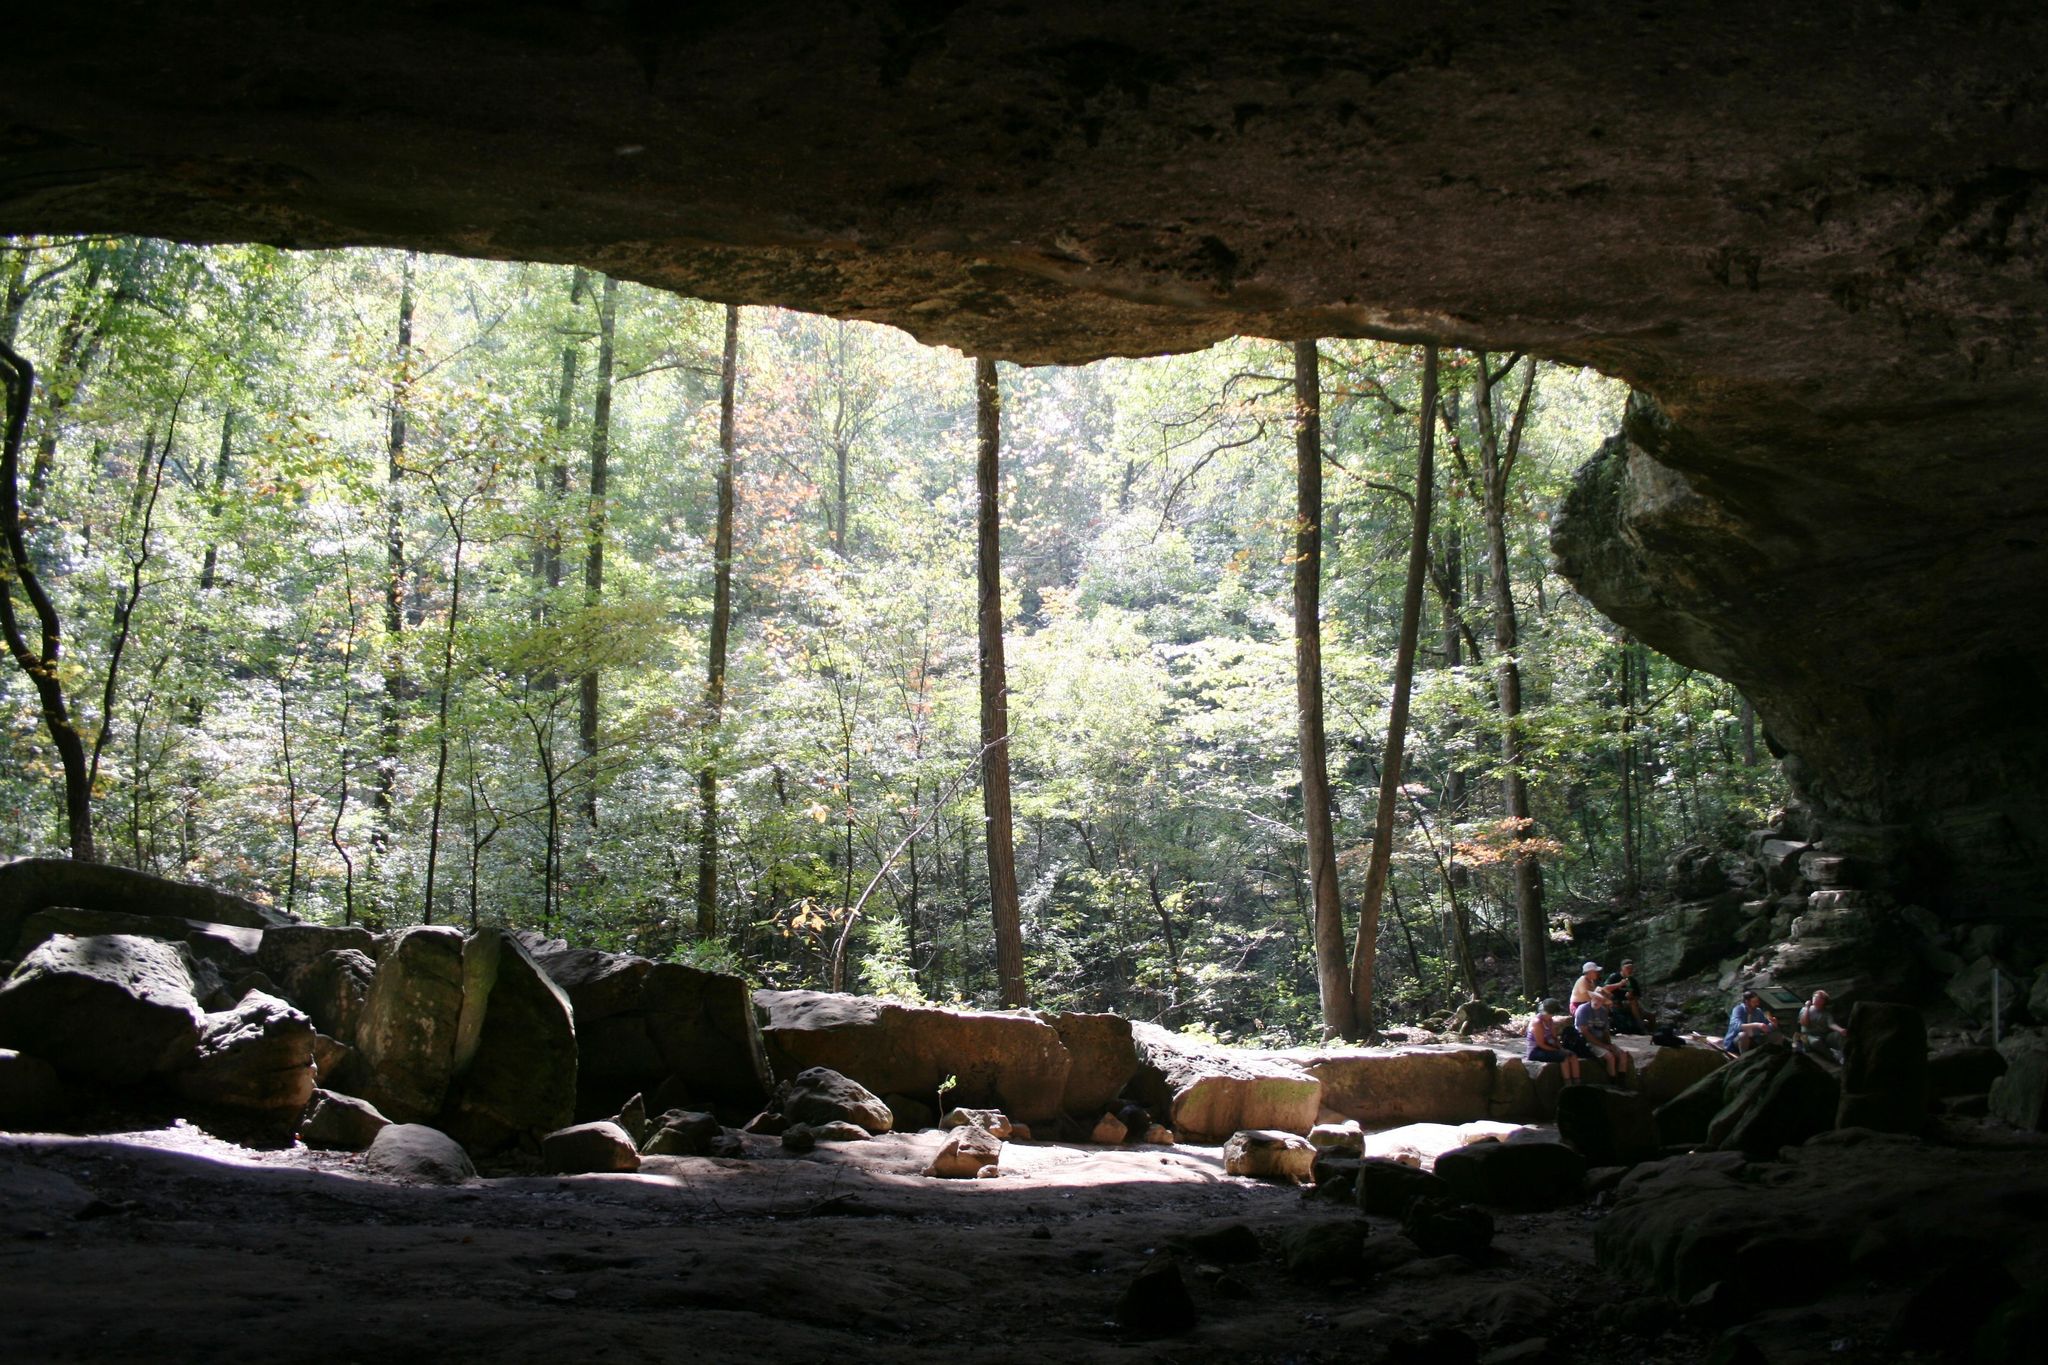 Every year thousands of people hike to the Indian Rockhouse to admire this large bluff shelter.